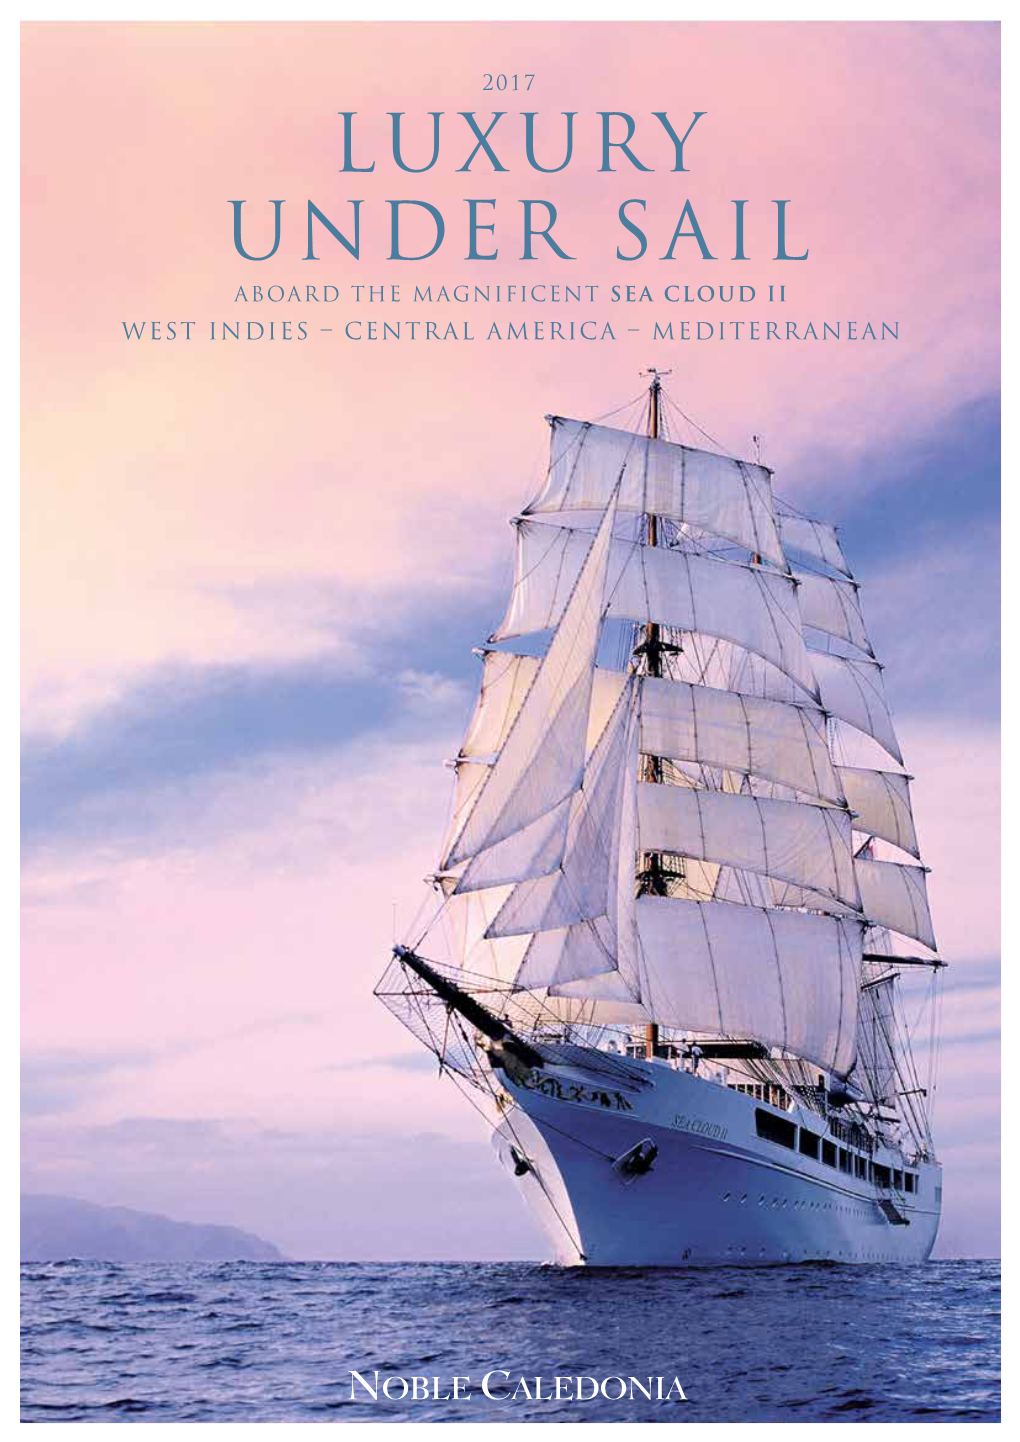 LUXURY UNDER SAIL Aboard the Magnificent Sea Cloud II West Indies – Central America – Mediterranean Marigot Bay, St Lucia Under Sail in Magnificent Style